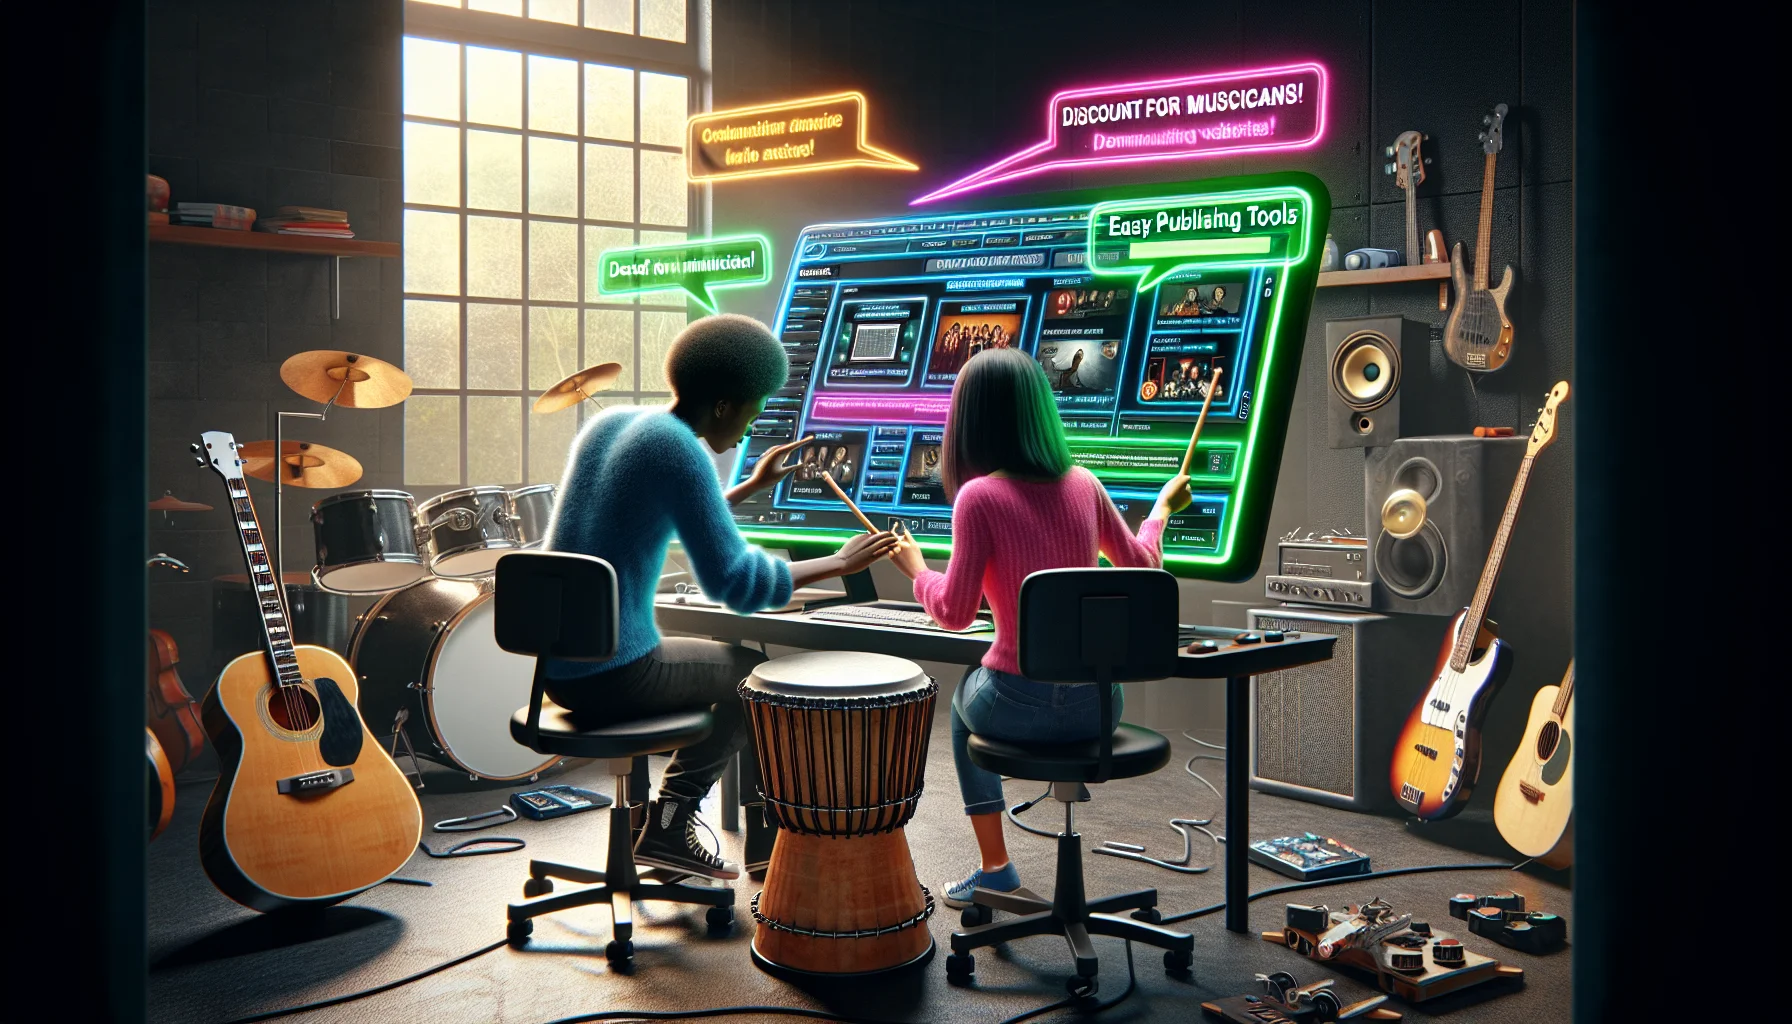 Create a comical, realistic image that represents the environment of a music studio filled with variety of musical instruments. In the scene, an African female guitarist is collaborating with her Asian male drumming friend to build a website on a large, futuristic touch-screen computer. The computer screen displays a user-friendly interface and options that aid musicians in creating their own websites. With an inviting, humorous twist, the computer screen attempts to entice the musicians with bright neon pop-ups saying 'Discount for Musicians!' and 'Easy Publishing Tools!'